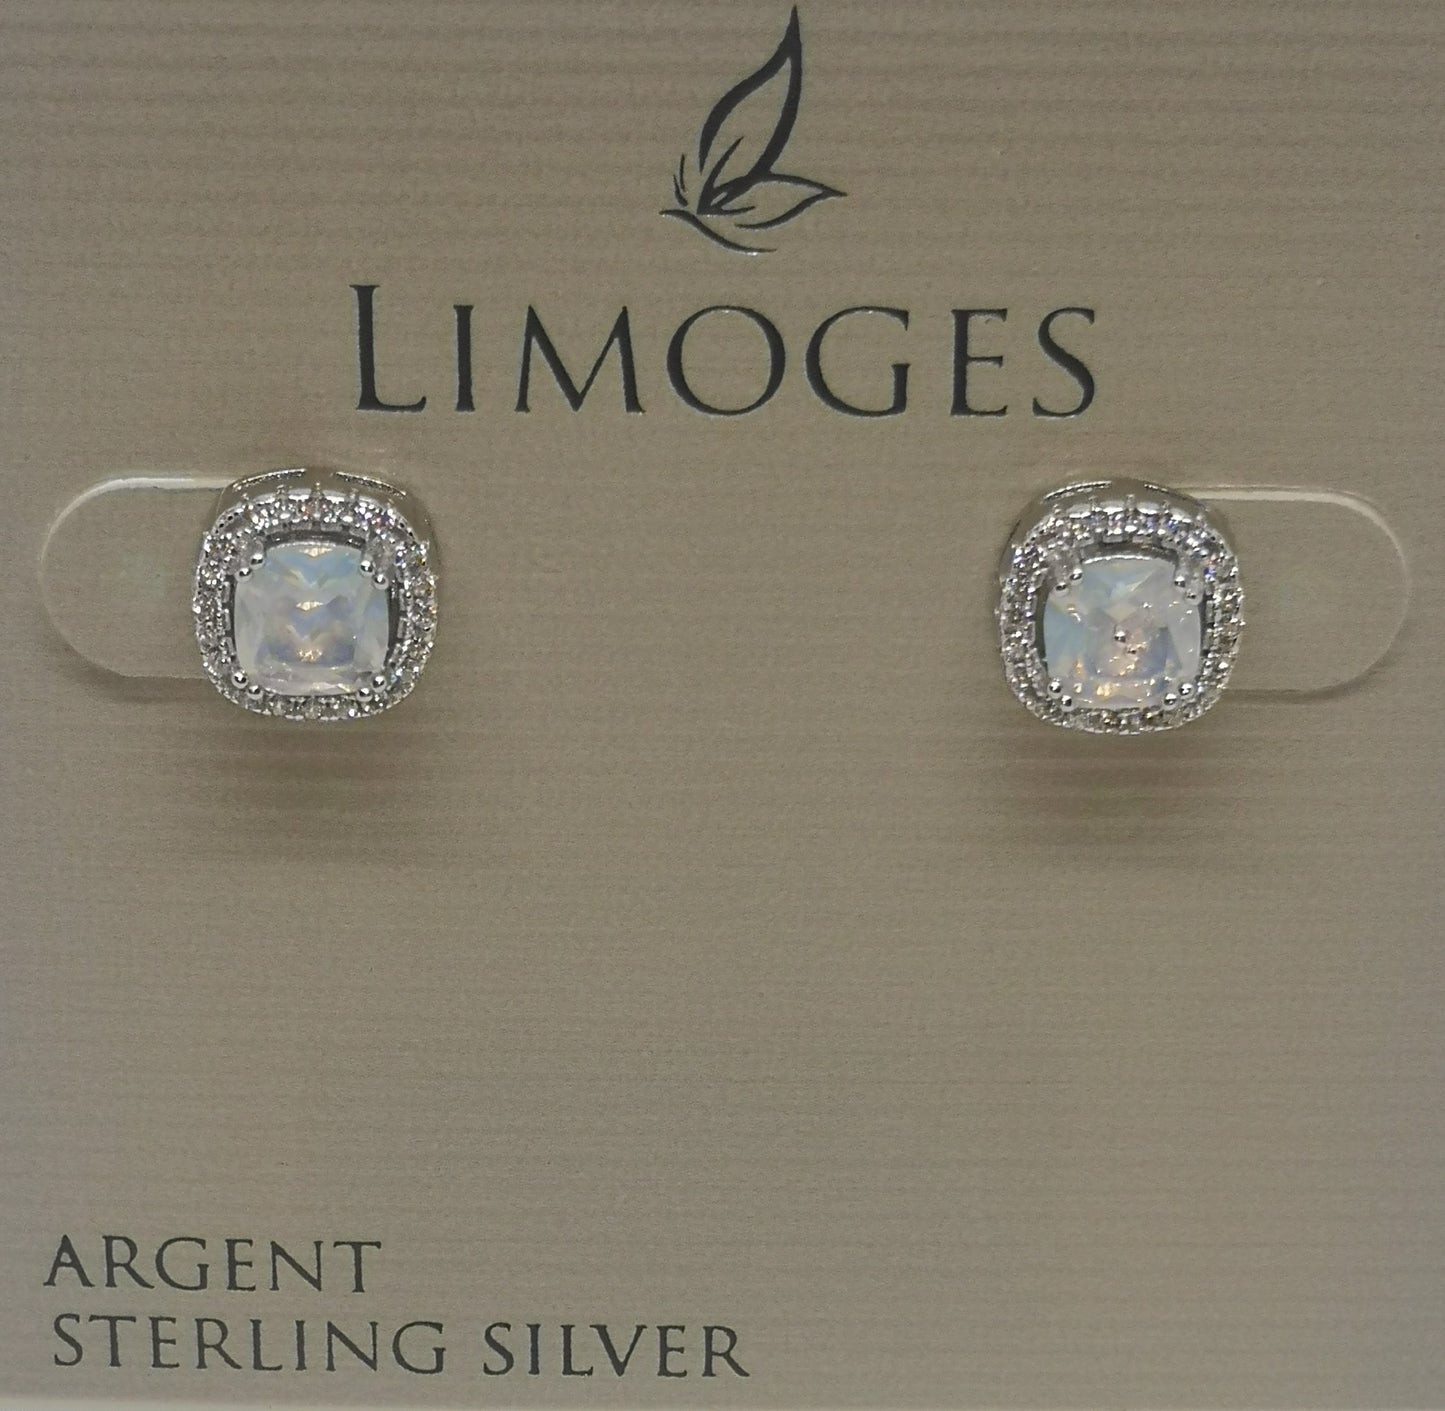 Sterling silver studded earrings with cubic zirconia's surrounding the center stone